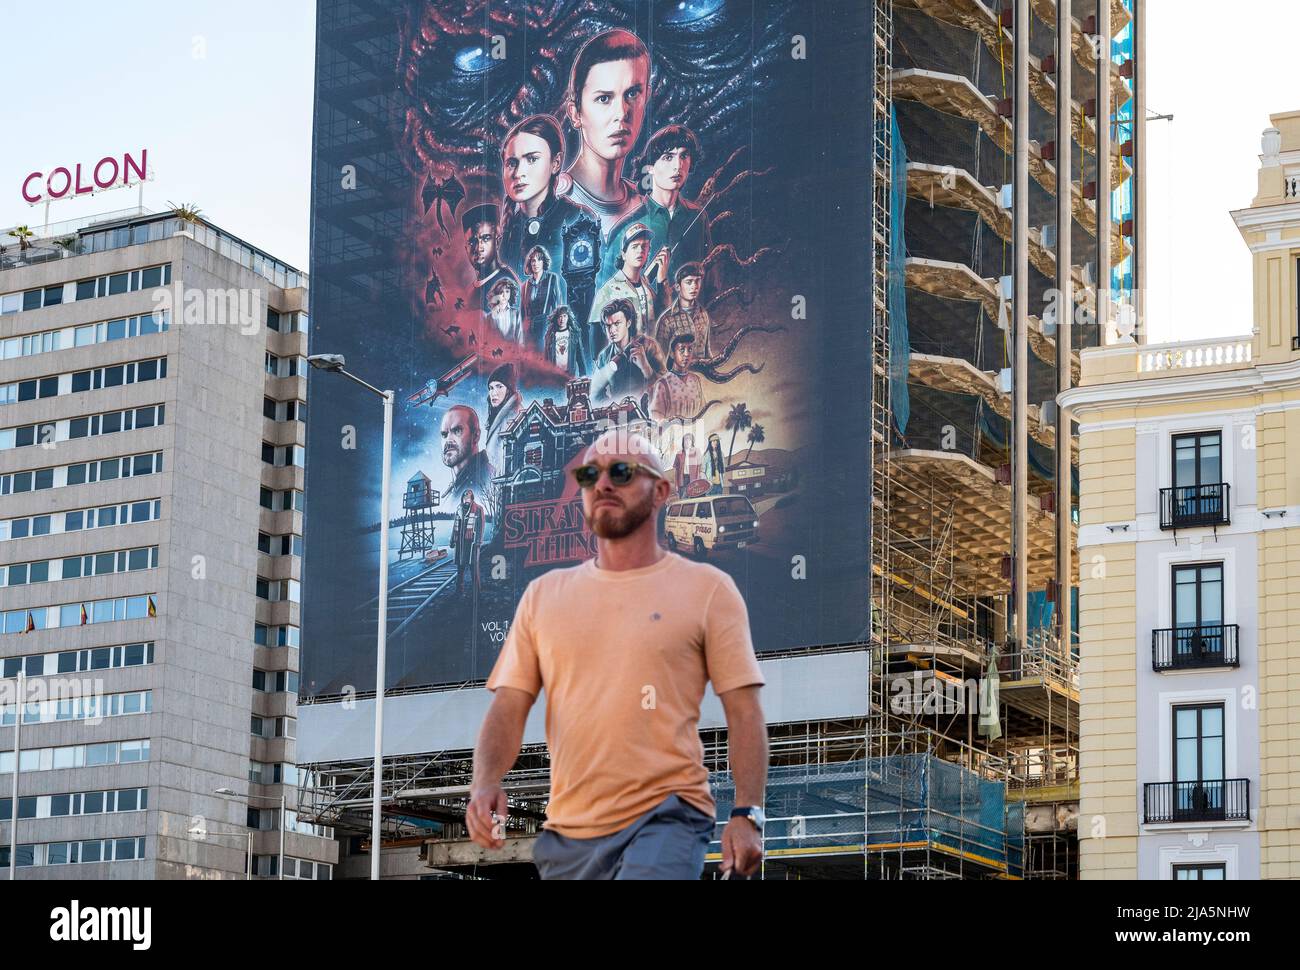 Madrid, Spain. 28th May, 2022. A pedestrian walks past a large street advertisement billboard from the American global on-demand Internet streaming media provider Netflix featuring Stranger Things Season 4 TV show in Spain. (Photo by Xavi Lopez/SOPA Images/Sipa USA) Credit: Sipa USA/Alamy Live News Stock Photo